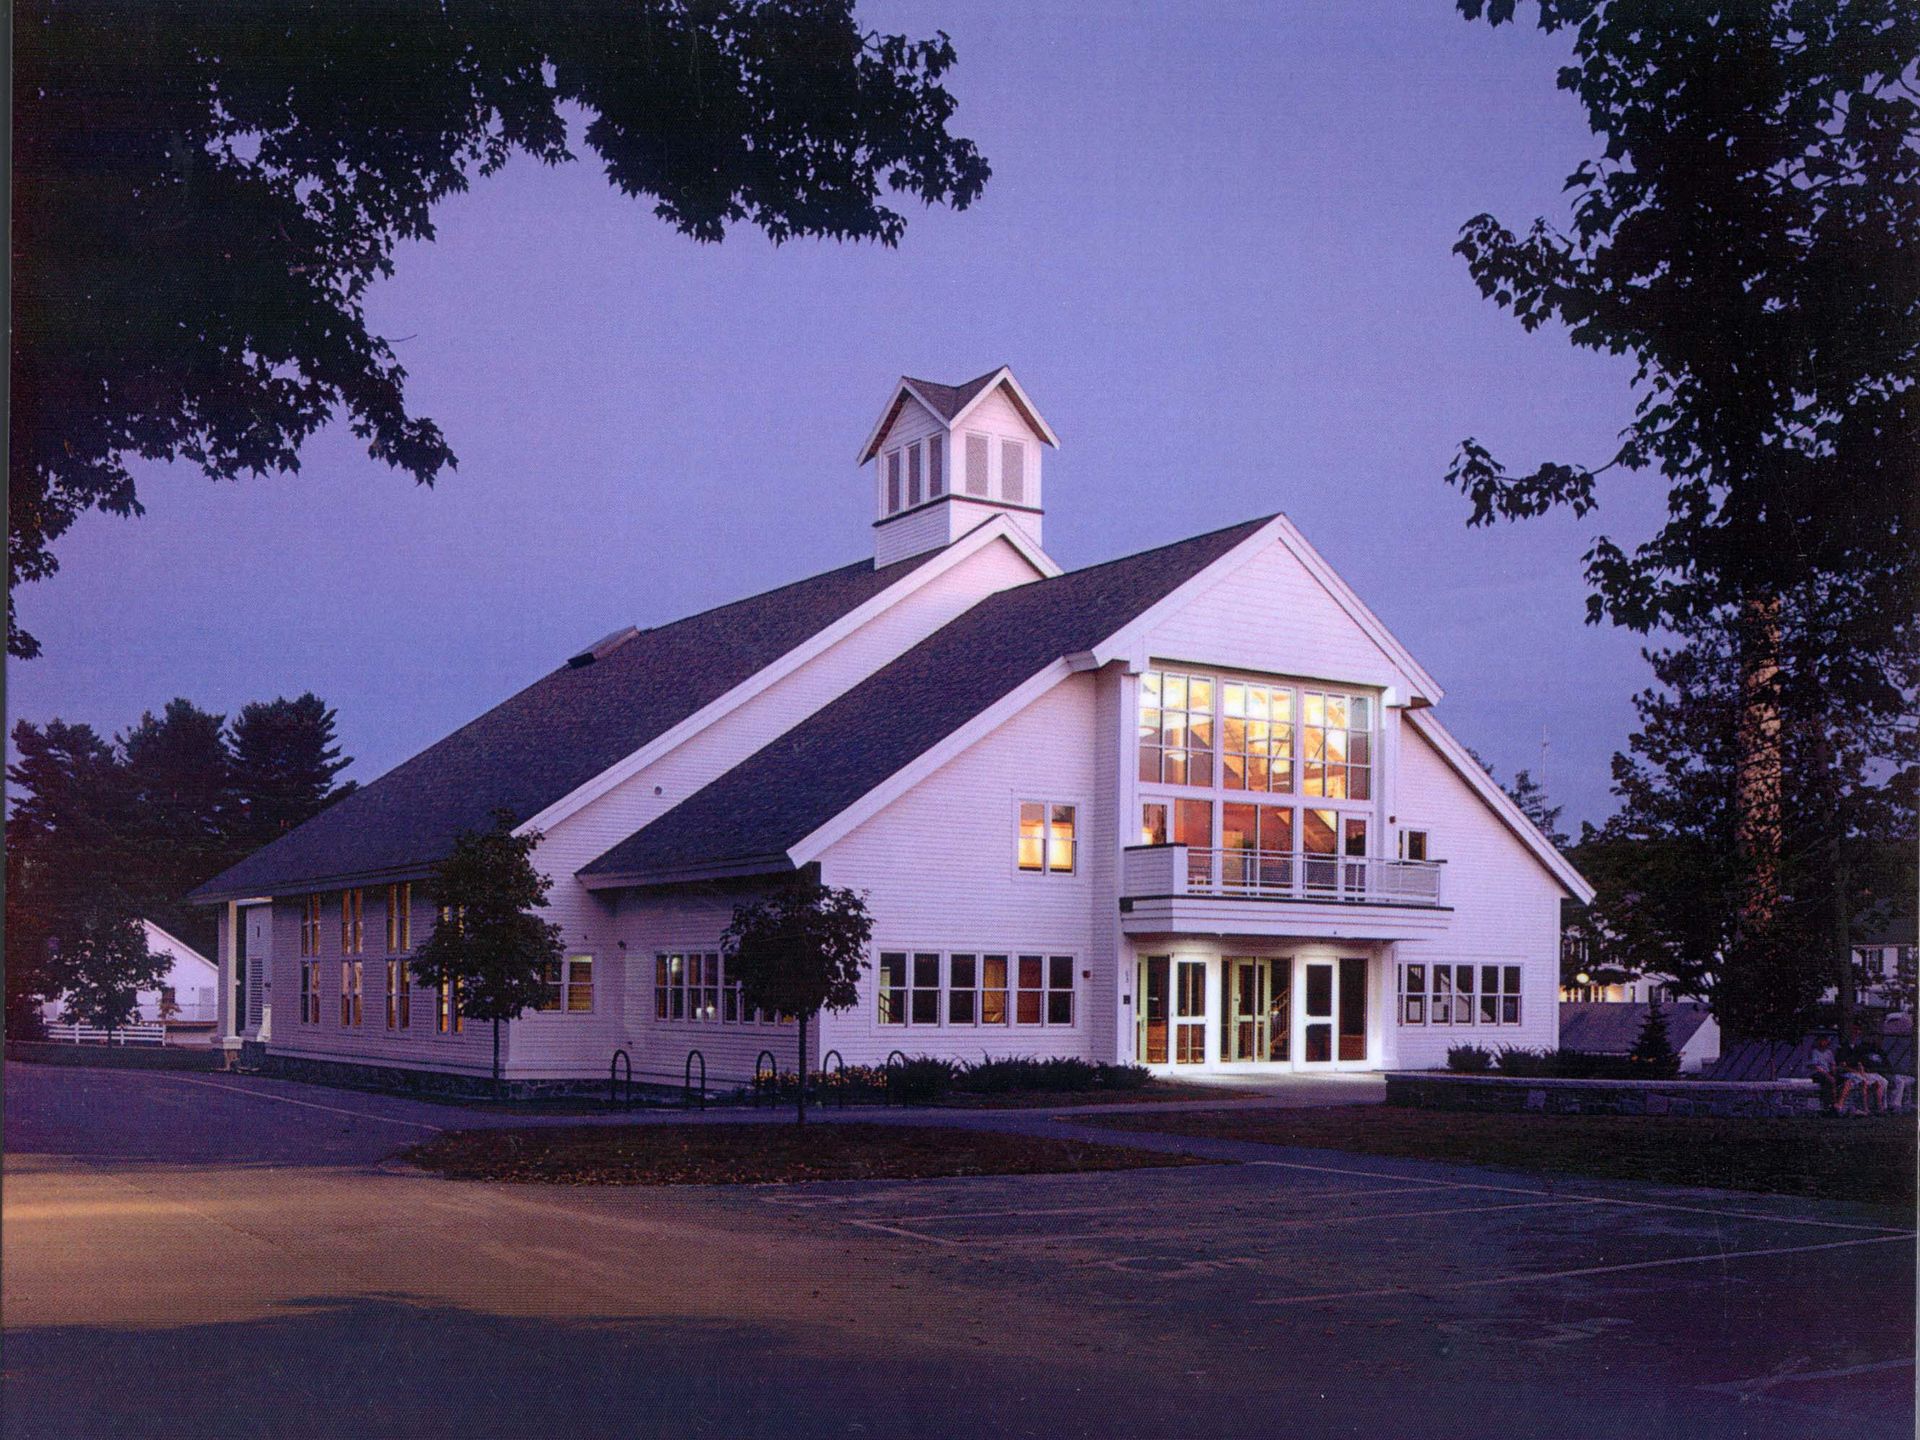 Proctor Academy Theater & Meeting House